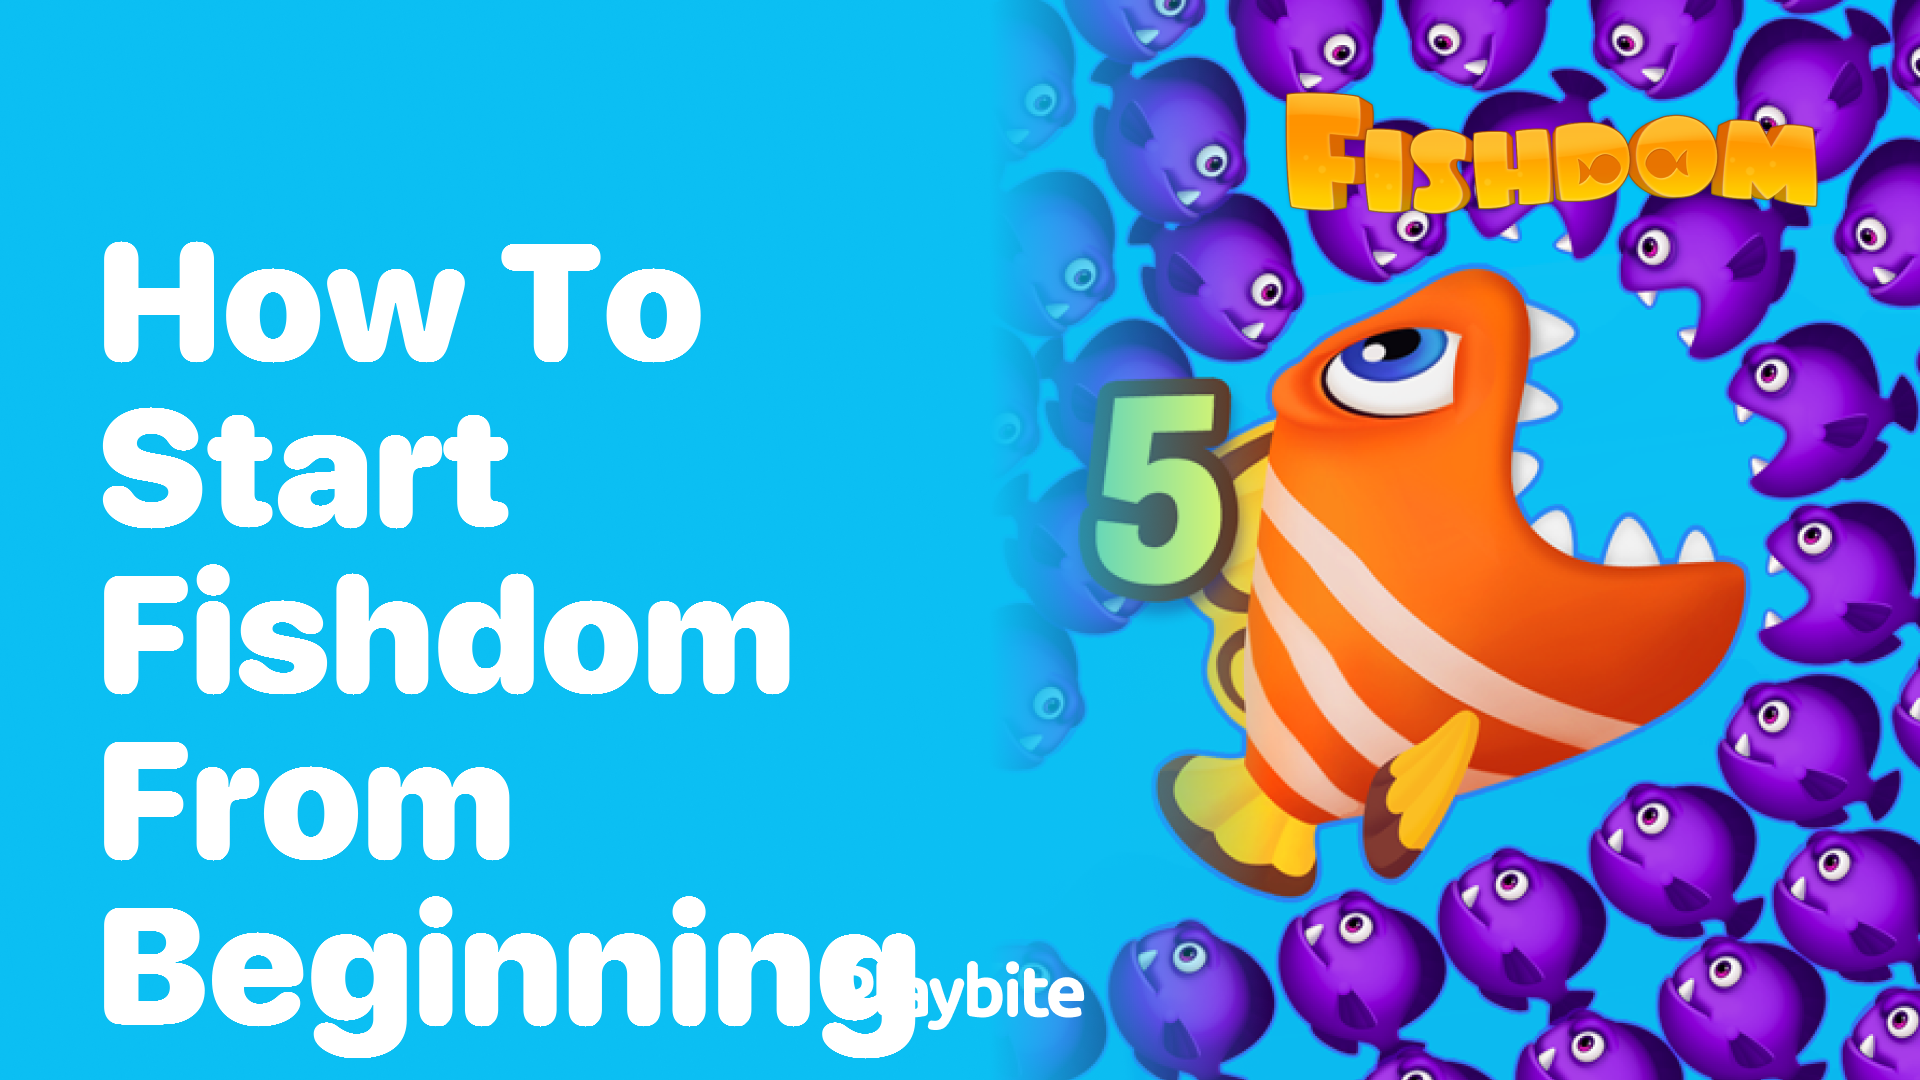 How to Start Fishdom from the Beginning